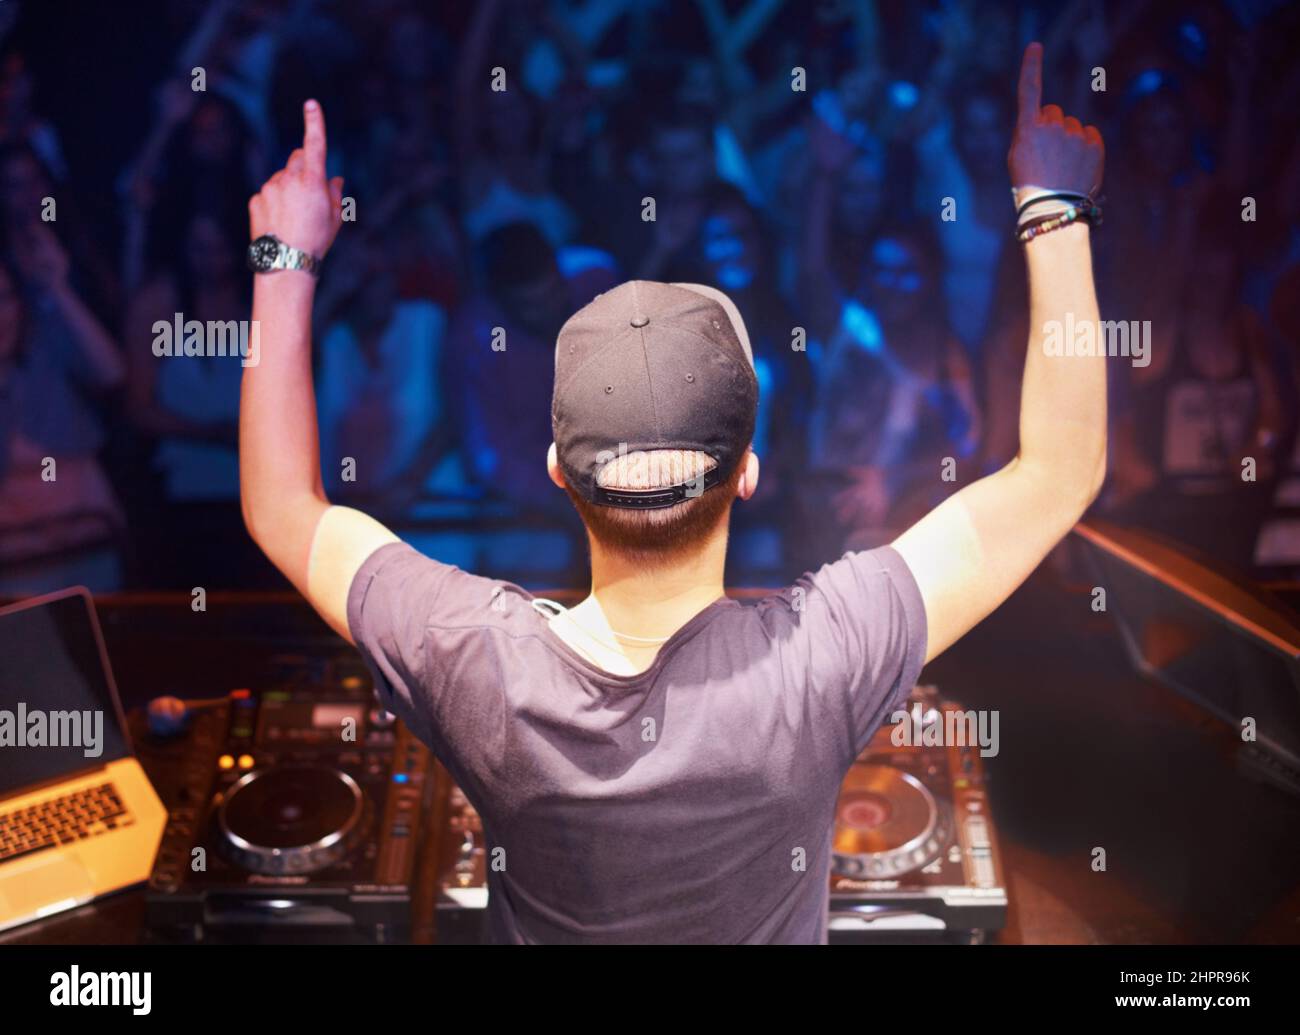 Spinning the wheels of steel. Rear view of a dj standing behind the decks with his hands in the air. Stock Photo